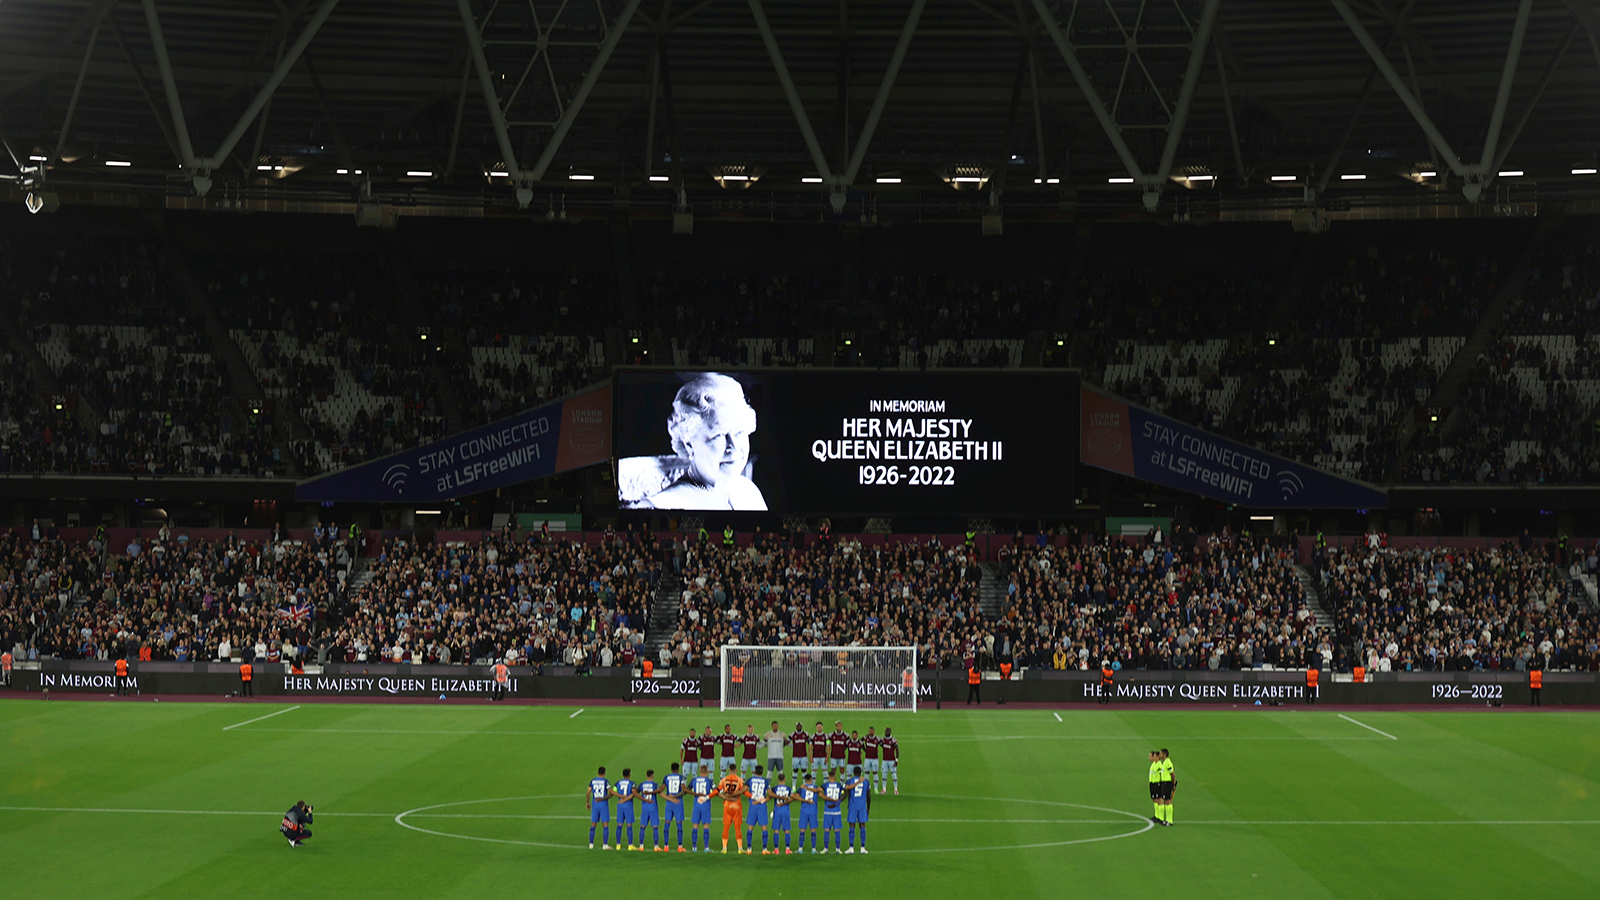 Players from West Ham United and FCSB pay tribute to Her Majesty Queen Elizabeth II